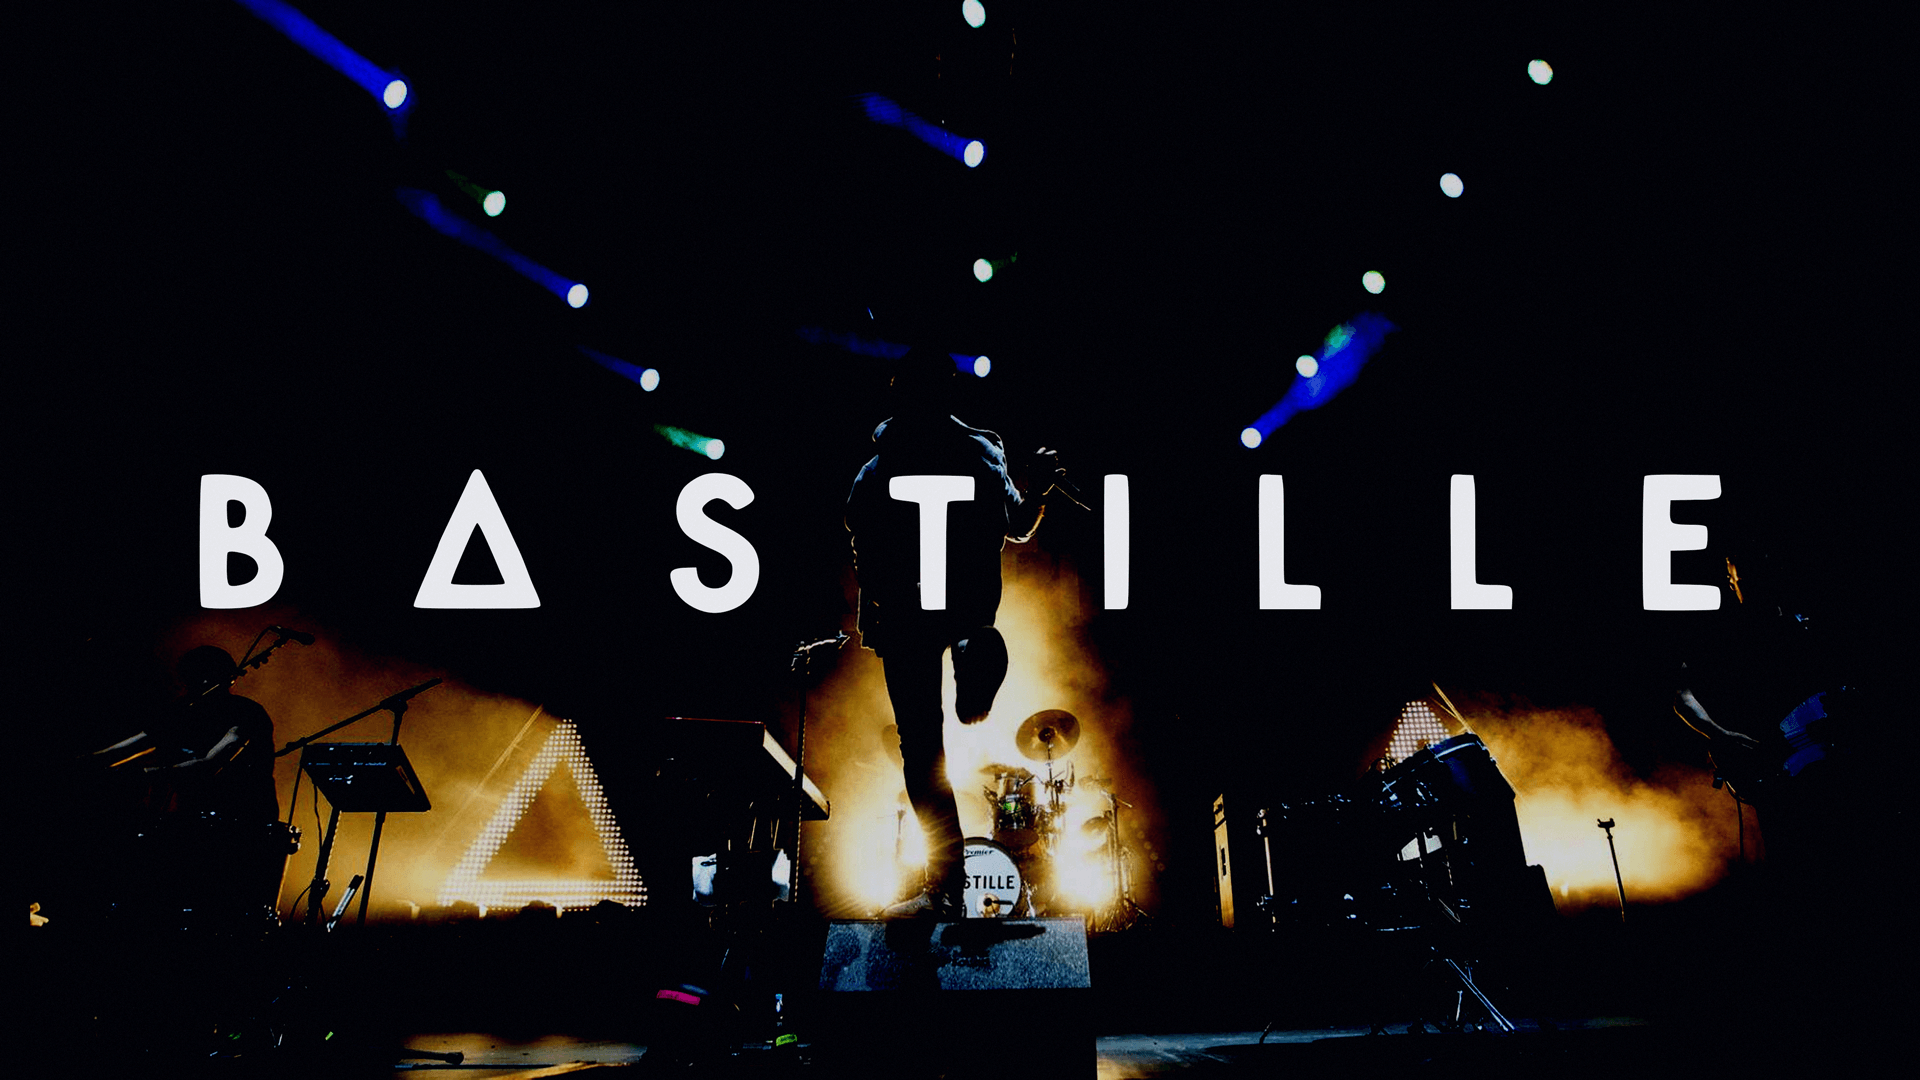 I made a wallpaper, hope you all like it : r/Bastille